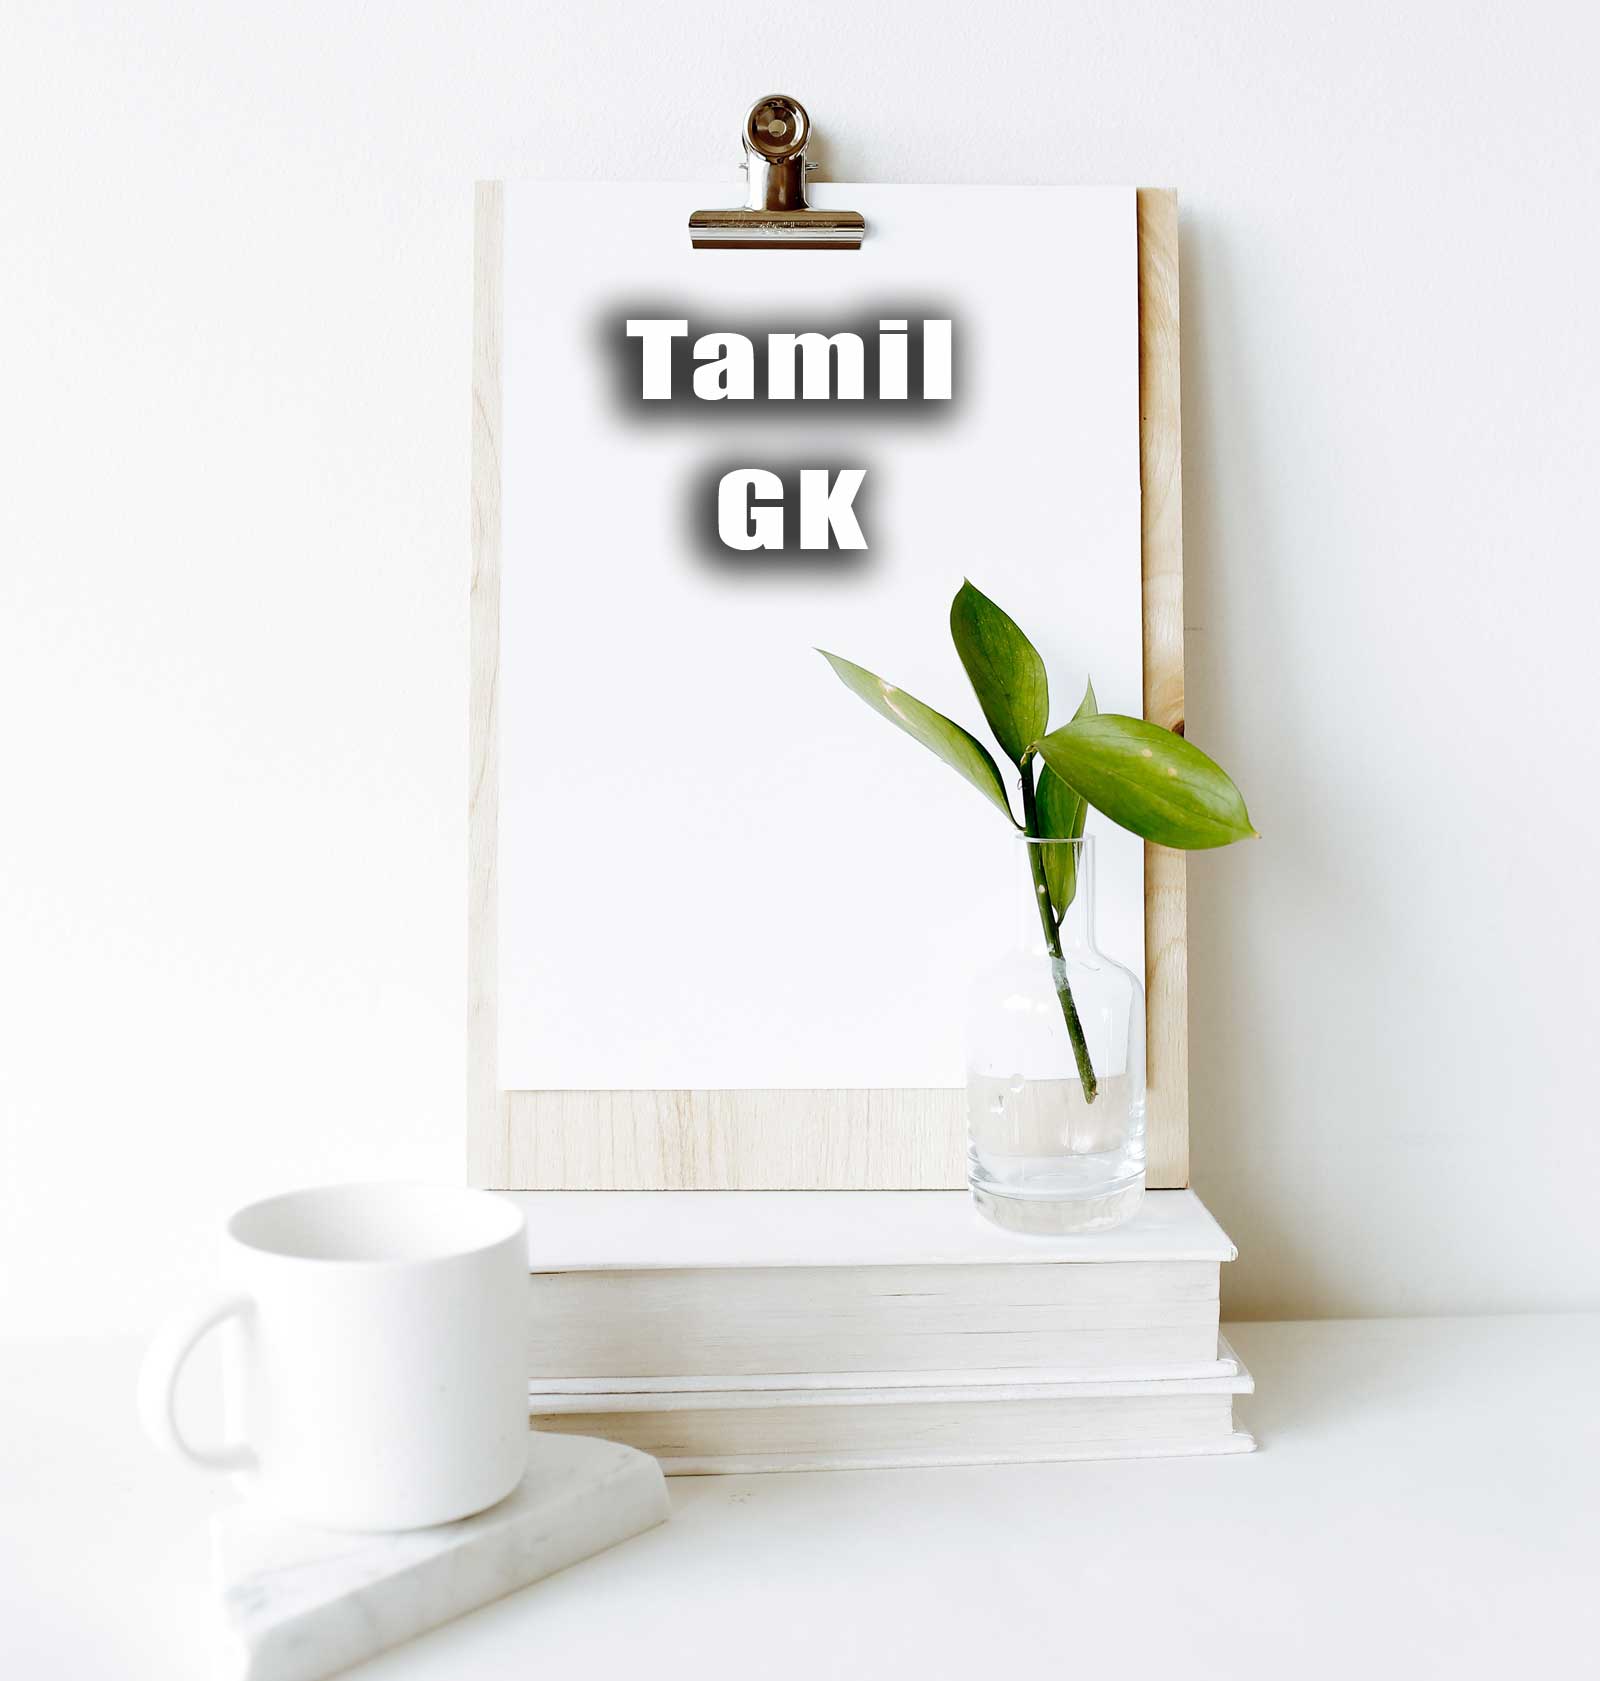 Tamil GK Typical Questions and Answers